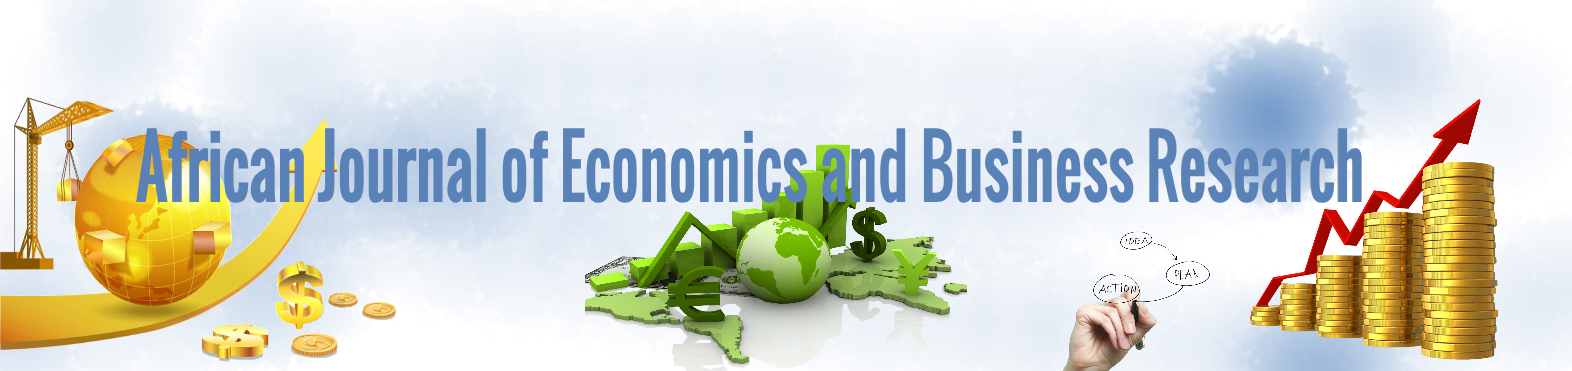 African Journal of Economics and Business Research